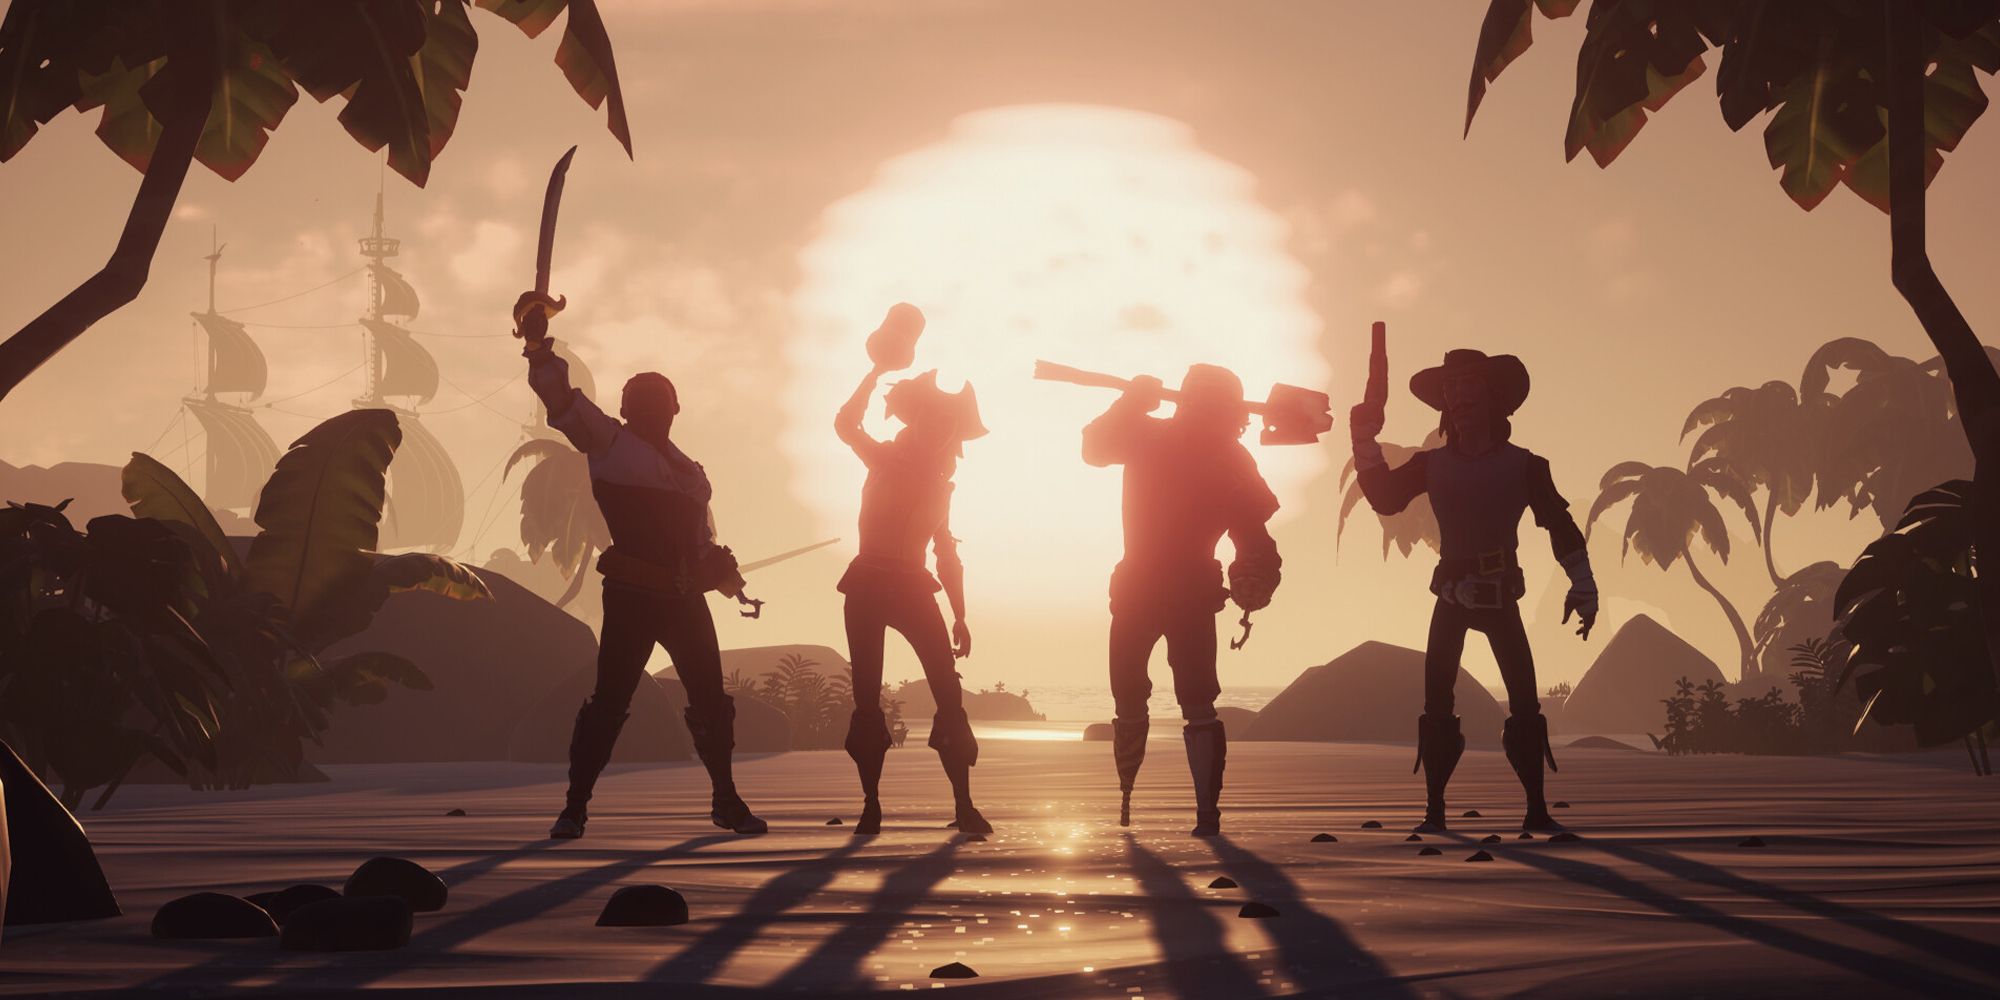 The silhouette of four pirates as they raise their sworsd and grog mugs to the air as the sun sets in Sea of Thieves.